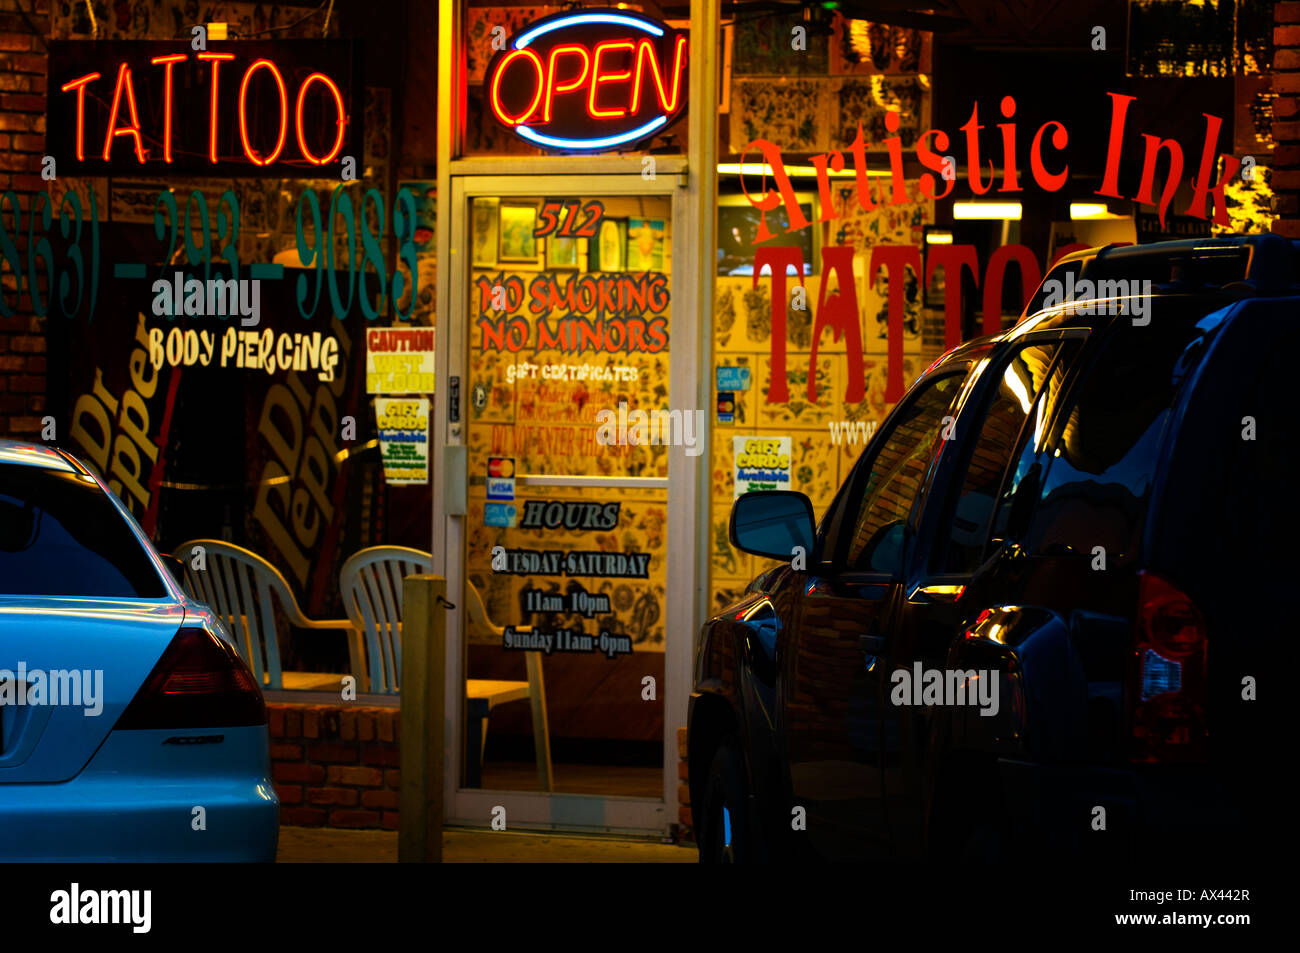 neon sign in tattoo parlor window in strip mall Stock Photo - Alamy